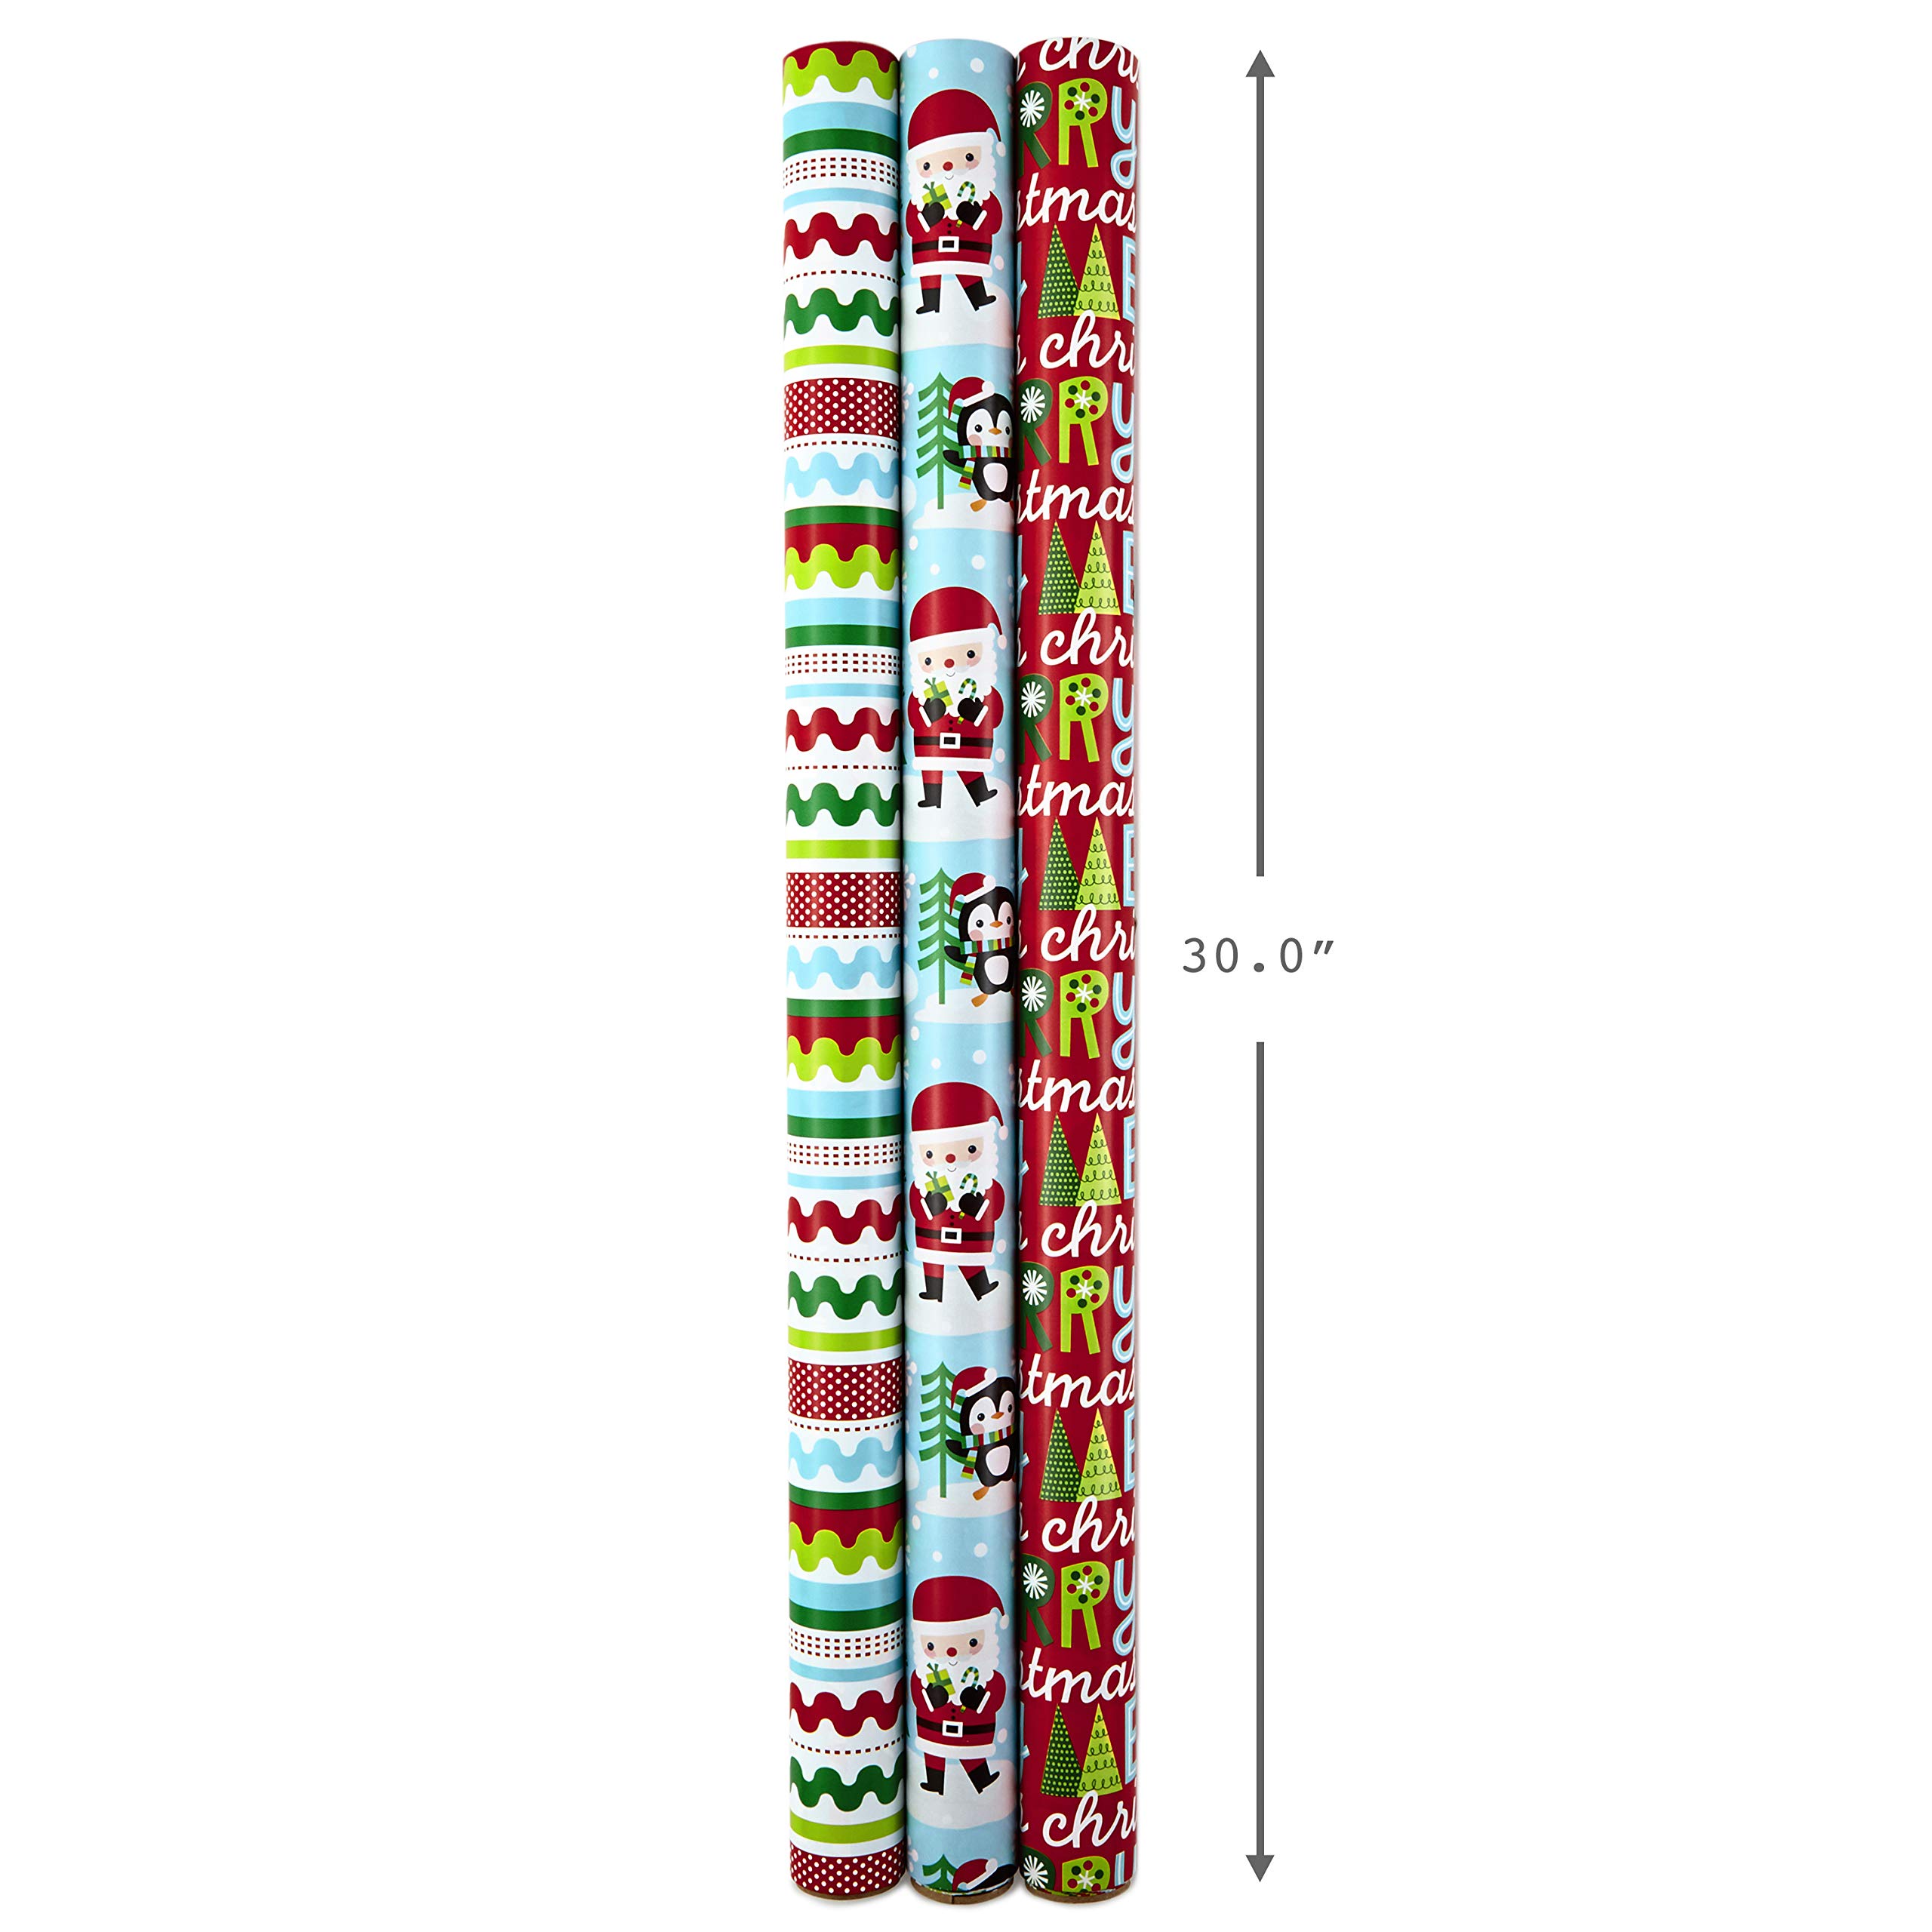 Hallmark Reversible Christmas Wrapping Paper Set with Ribbon and Gift Tag Stickers (3 Rolls of Wrapping Paper and Ribbon; Santa, Penguins, Stripes, Dots)